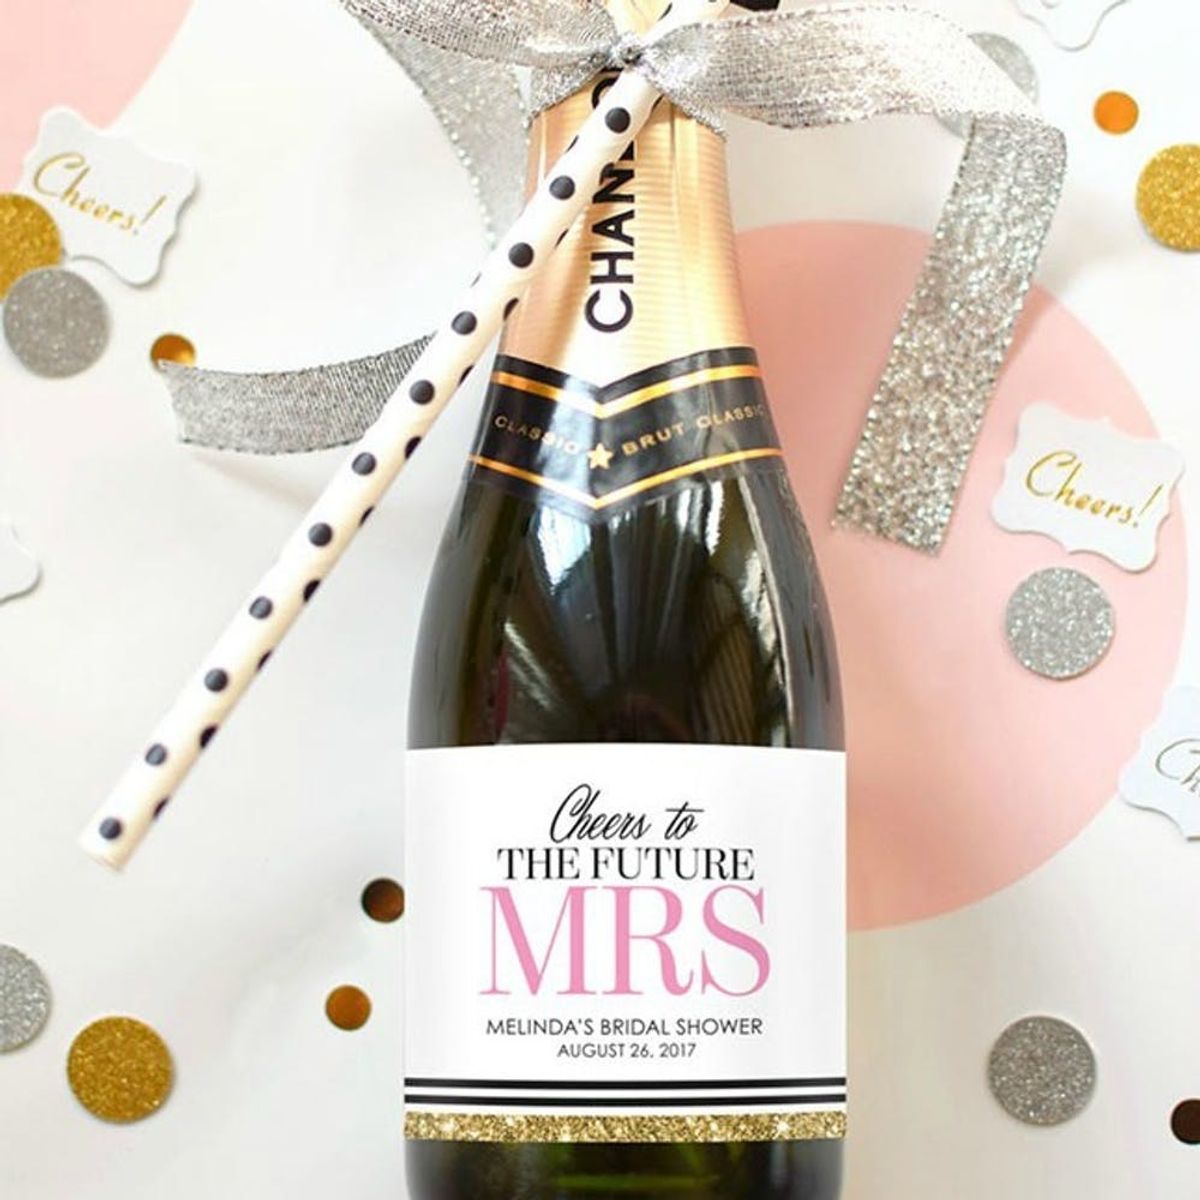 The Very Best Bachelorette Party Favors a Girl Could Ask For